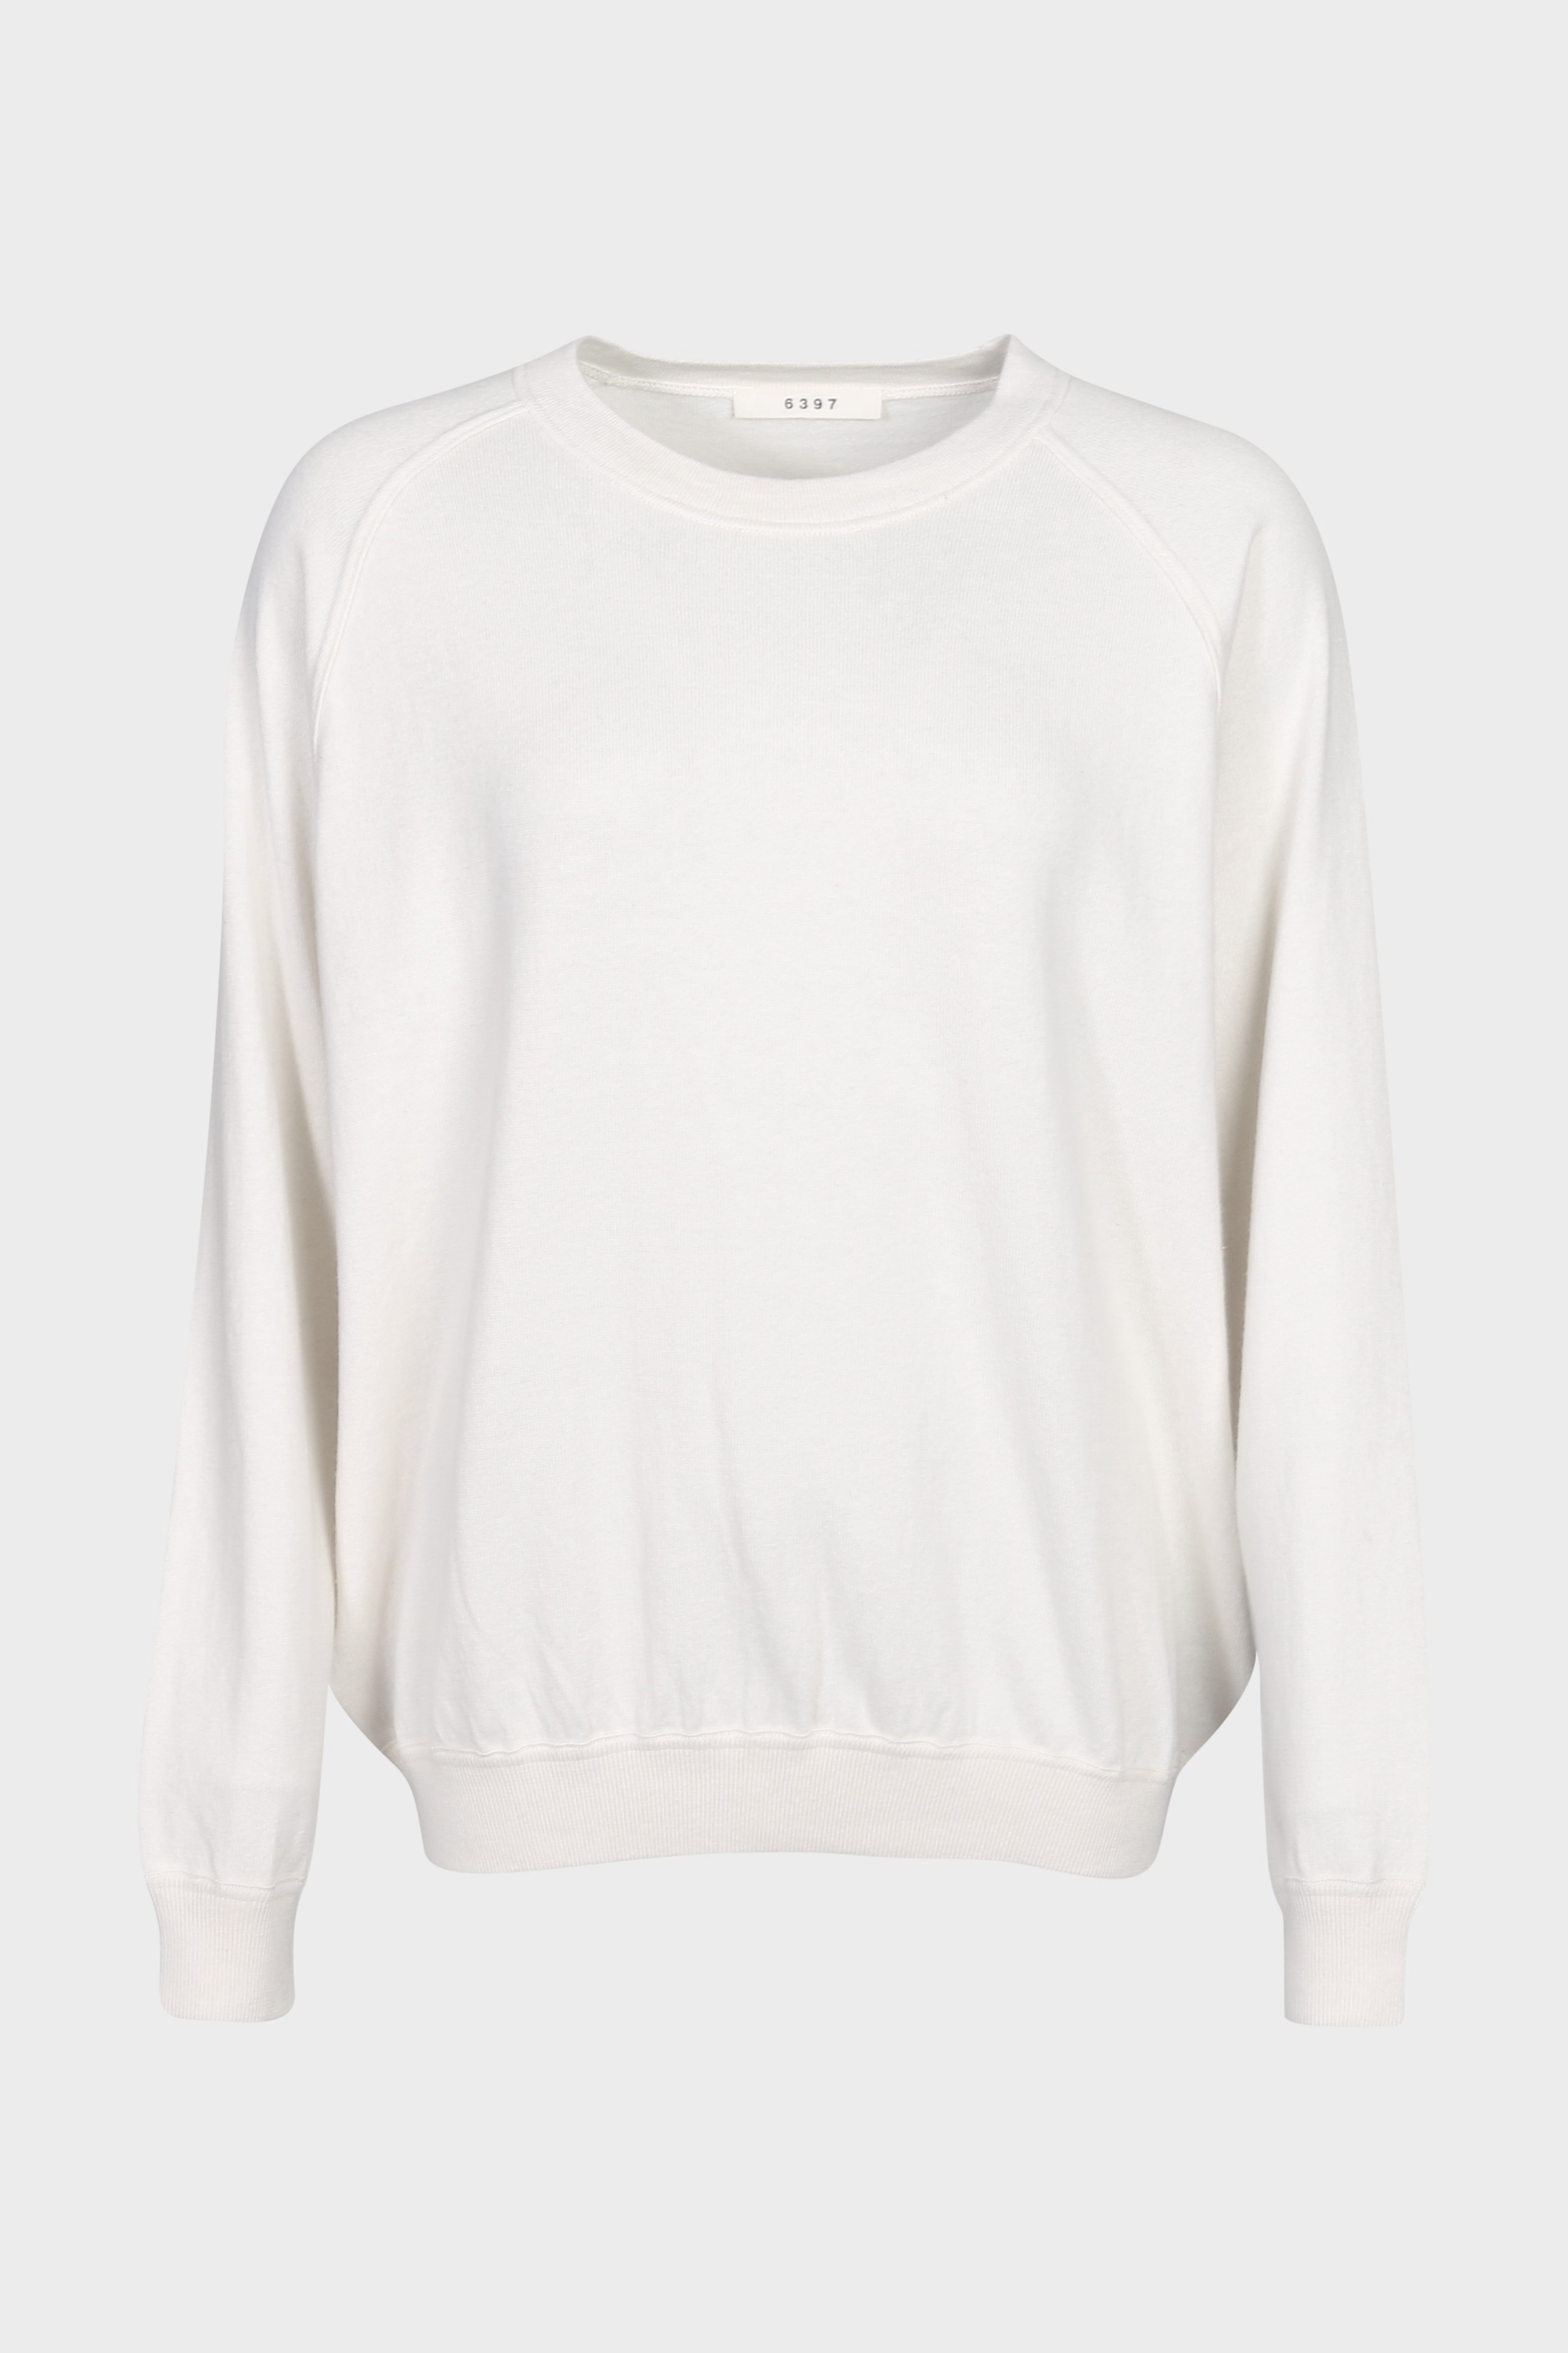 6397 Knit Pullover in Ivory